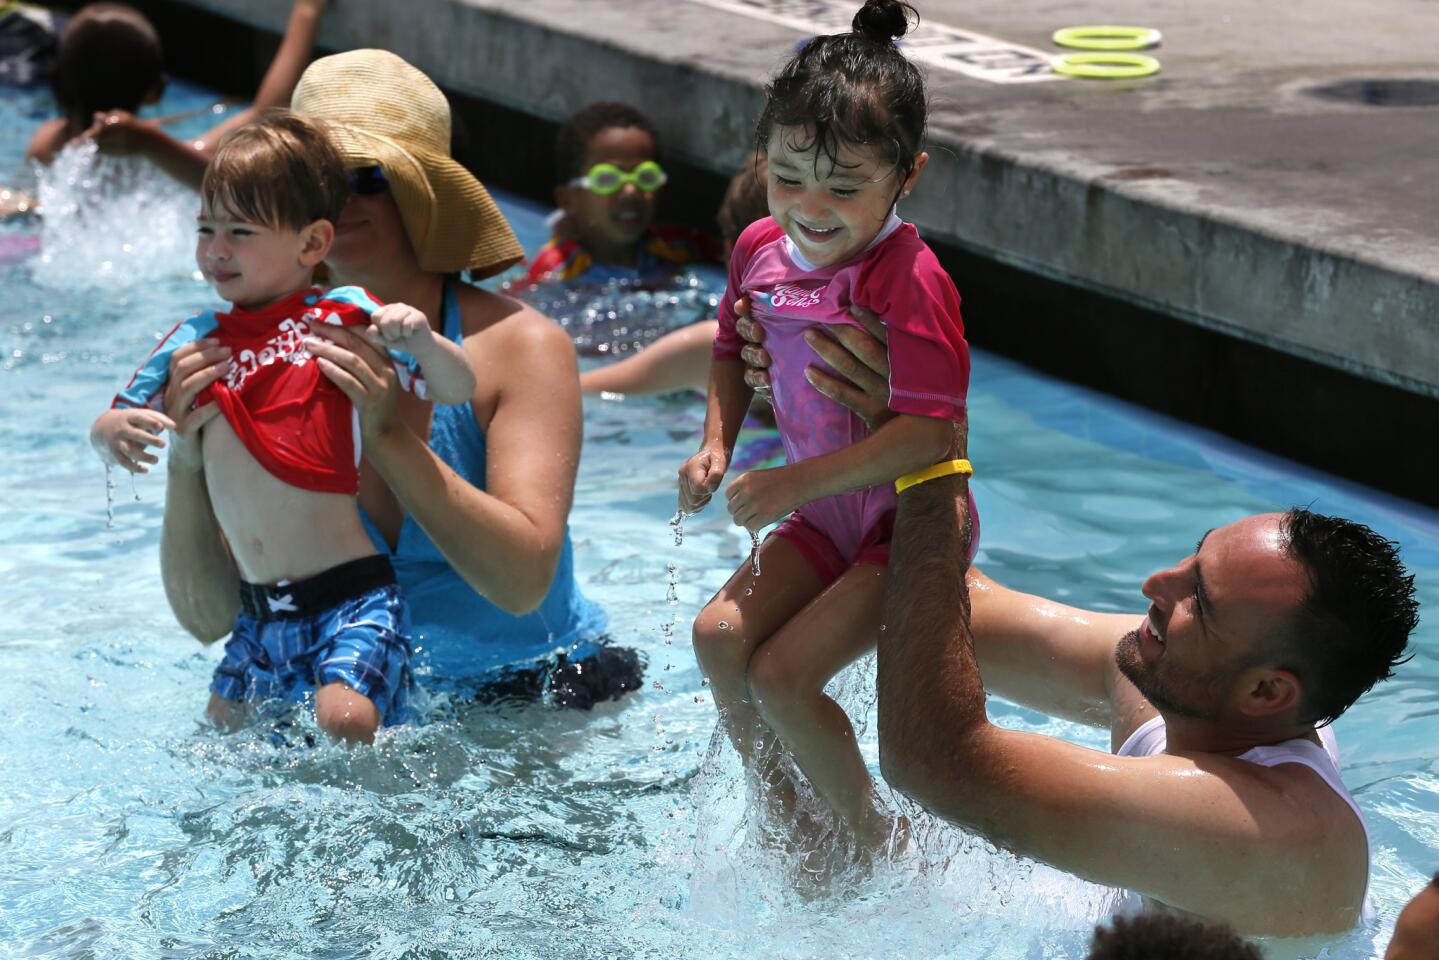 With Monday's midday temperature at 97 degrees, Paulette Davalos, 3, second from right, enjoys a refreshing dip with her dad, Francisco Davalos, during swim lessons at the Chaffey College Aquatics Center in Rancho Cucamonga.